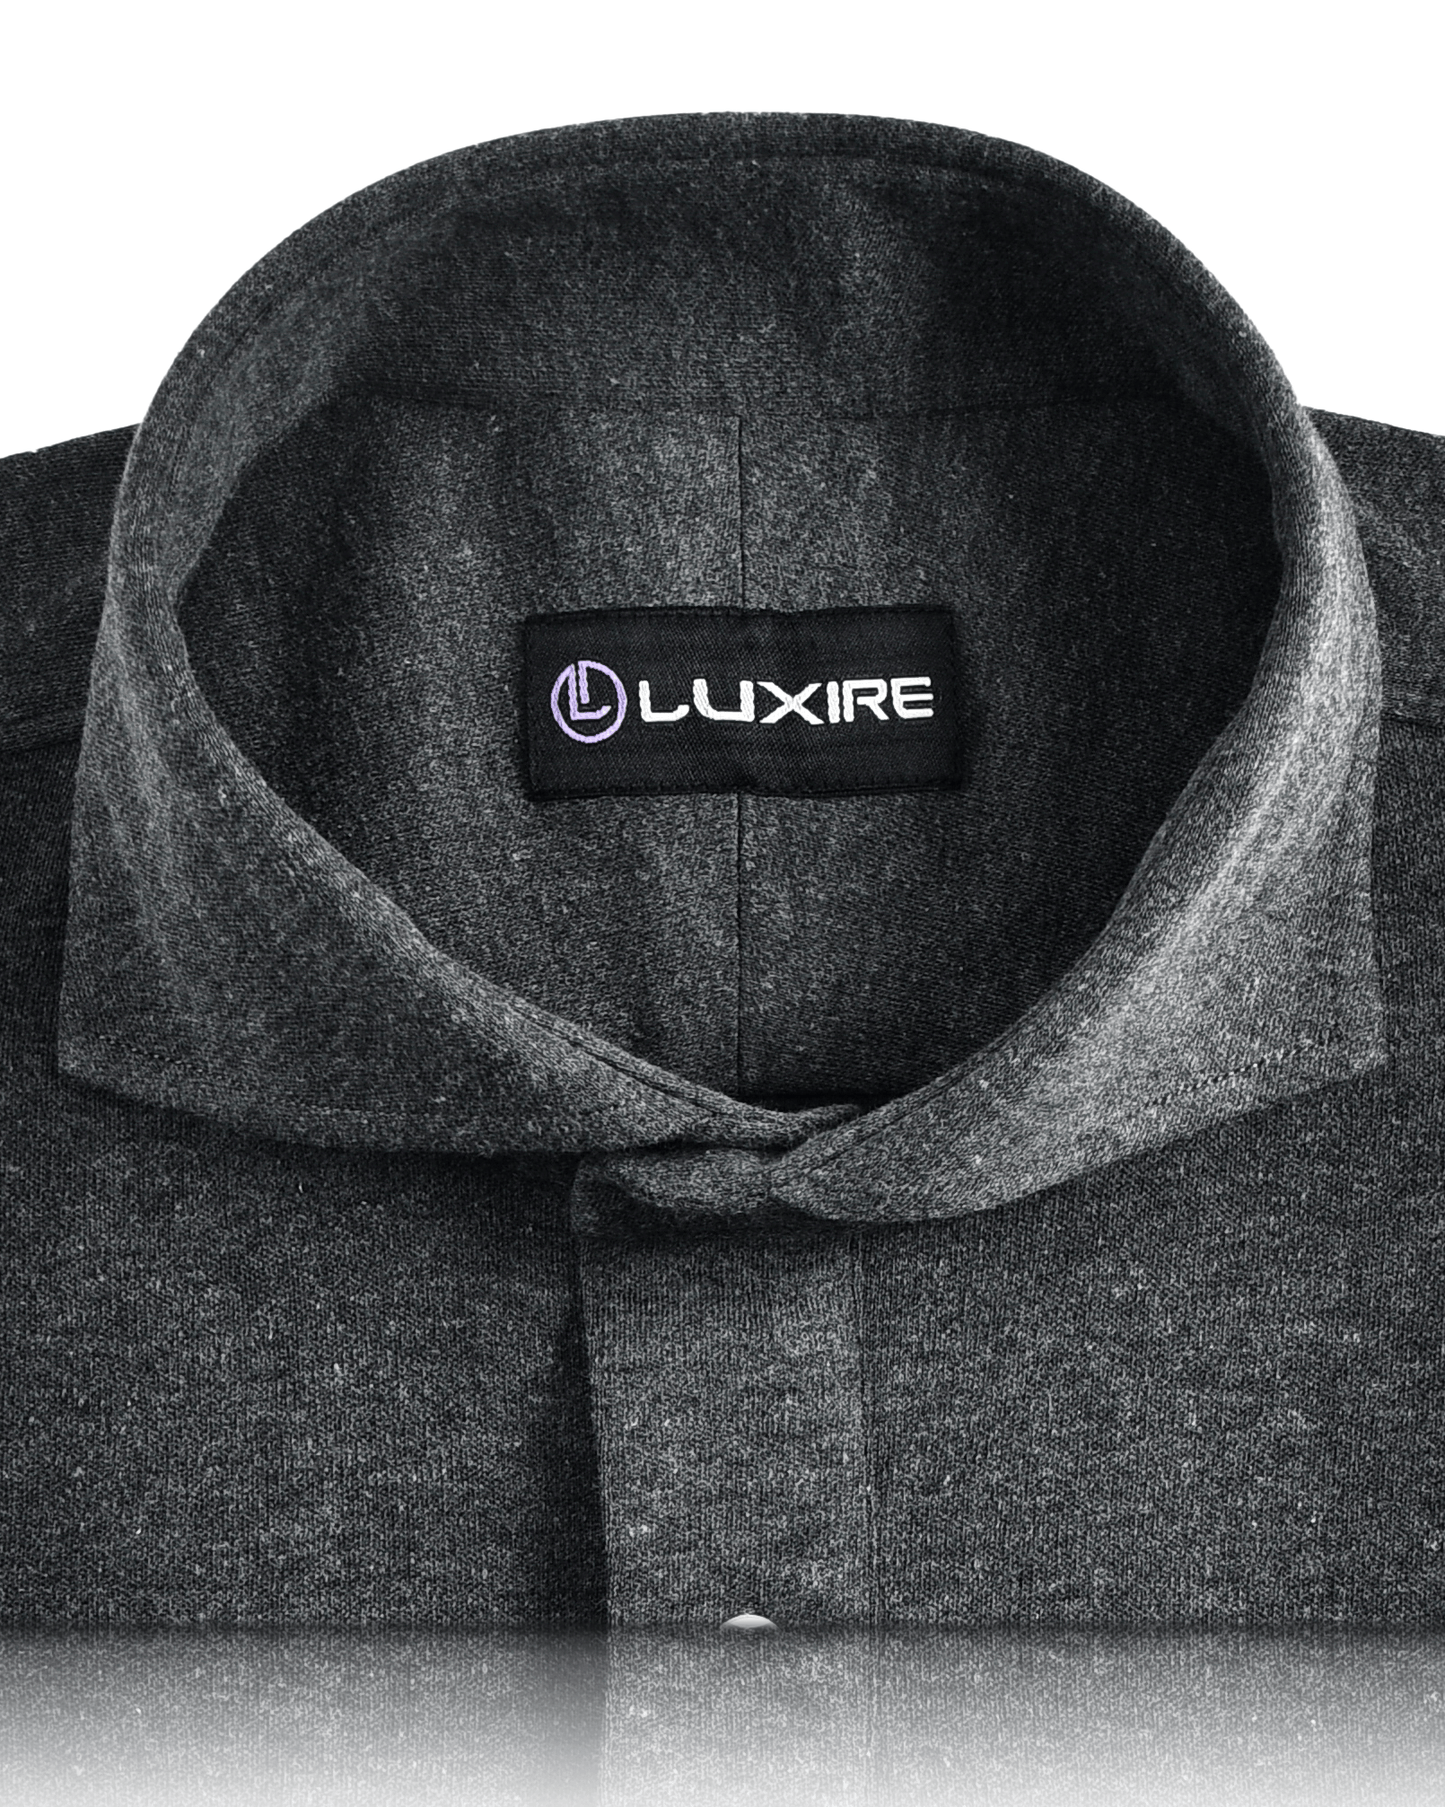 Collar of the custom oxford polo shirt for men by Luxire in soft midnight grey